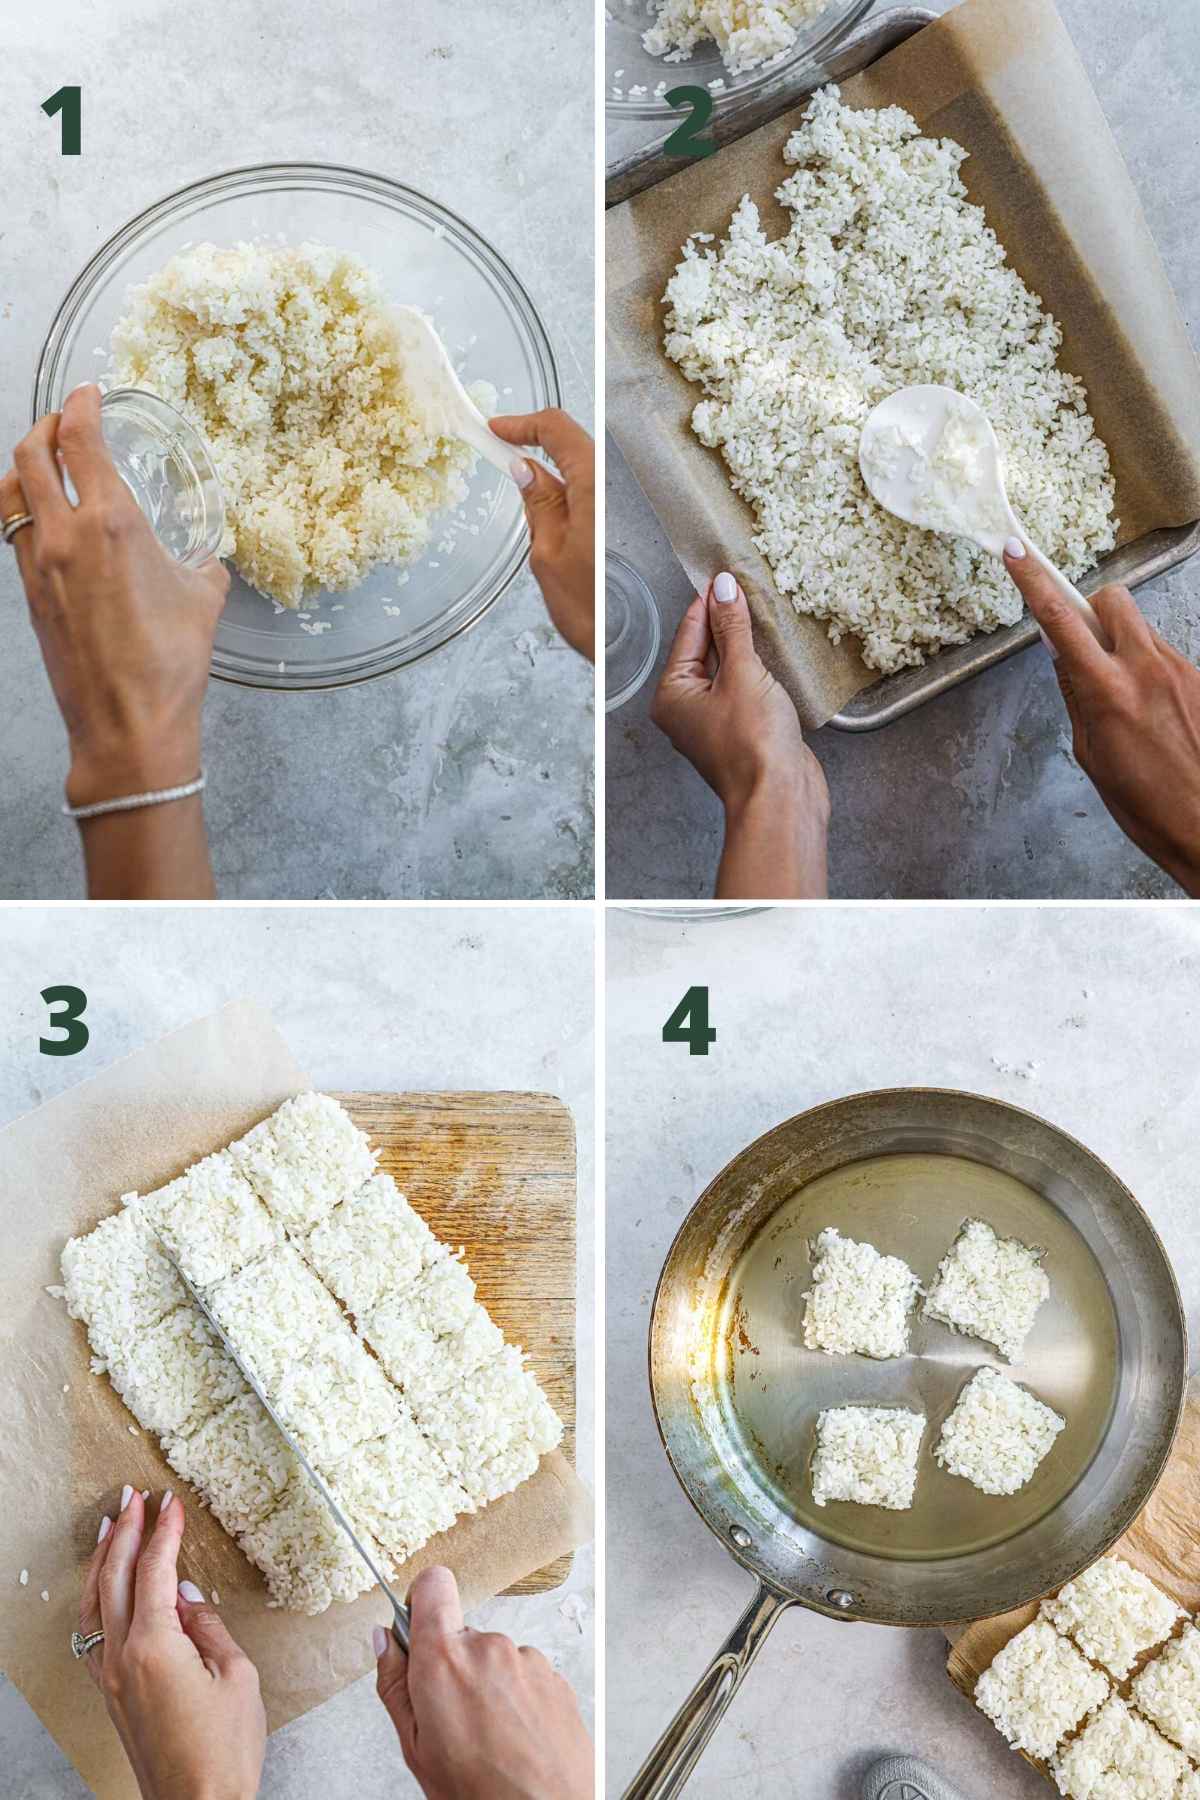 Steps to make crispy rice cakes, including seasoning and fluffing the rice, molding it on a parchment paper-lined baking sheet or dish to chill, cutting the rice into squares, and frying it in a pan.